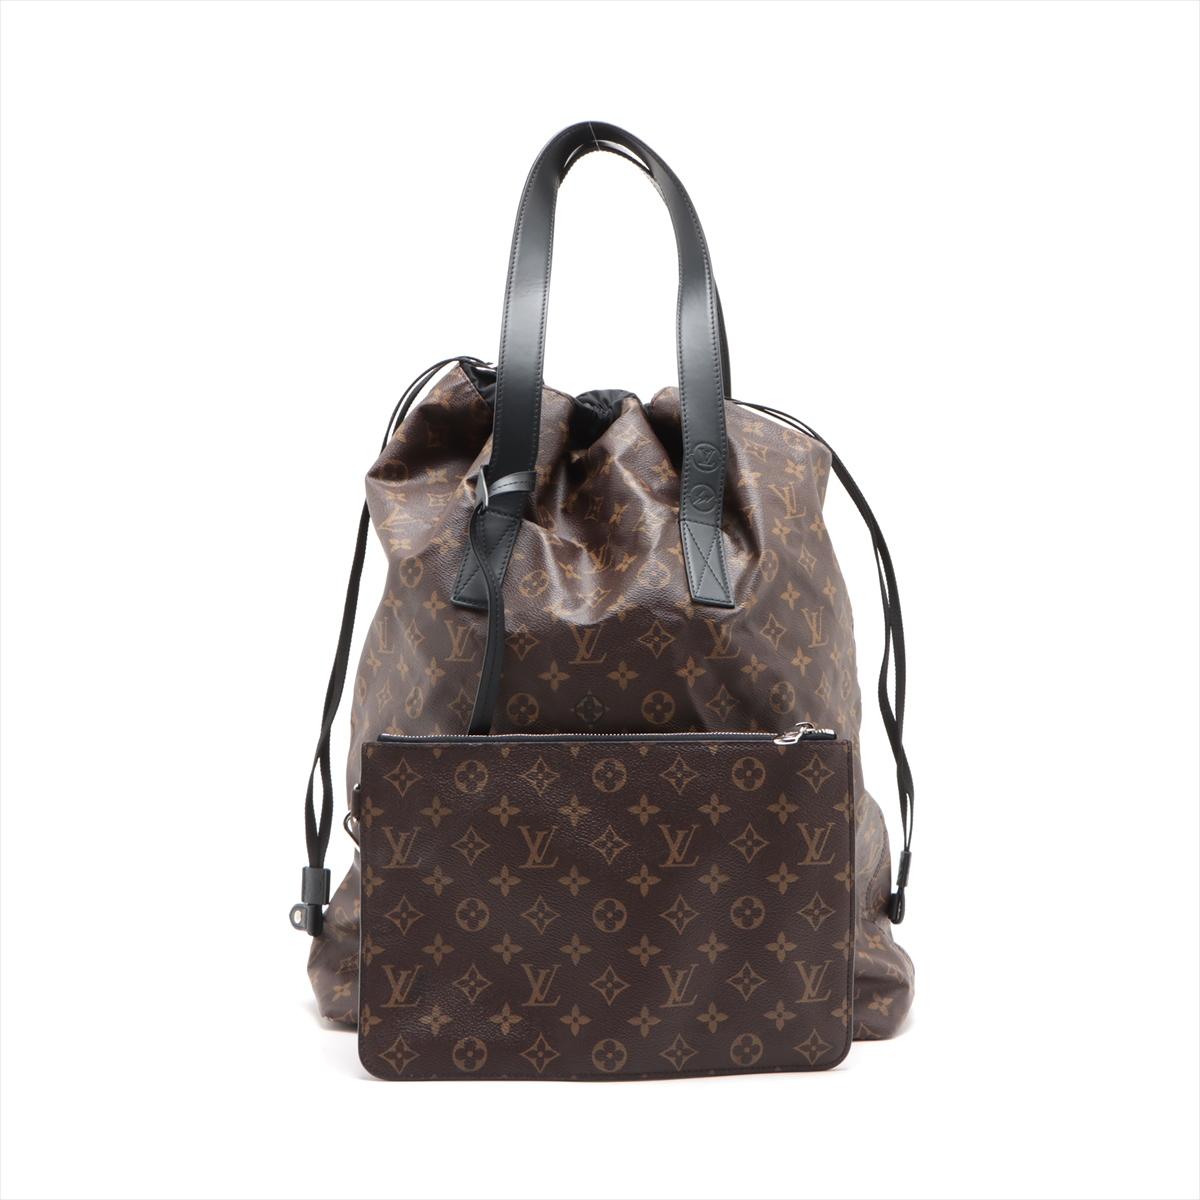 The Louis Vuitton × Fragment Monogram Macassar Cabas Light is a distinctive and contemporary tote bag that represents the collaboration between Louis Vuitton and Fragment Design. Crafted from Monogram Macassar canvas, the bag features the iconic